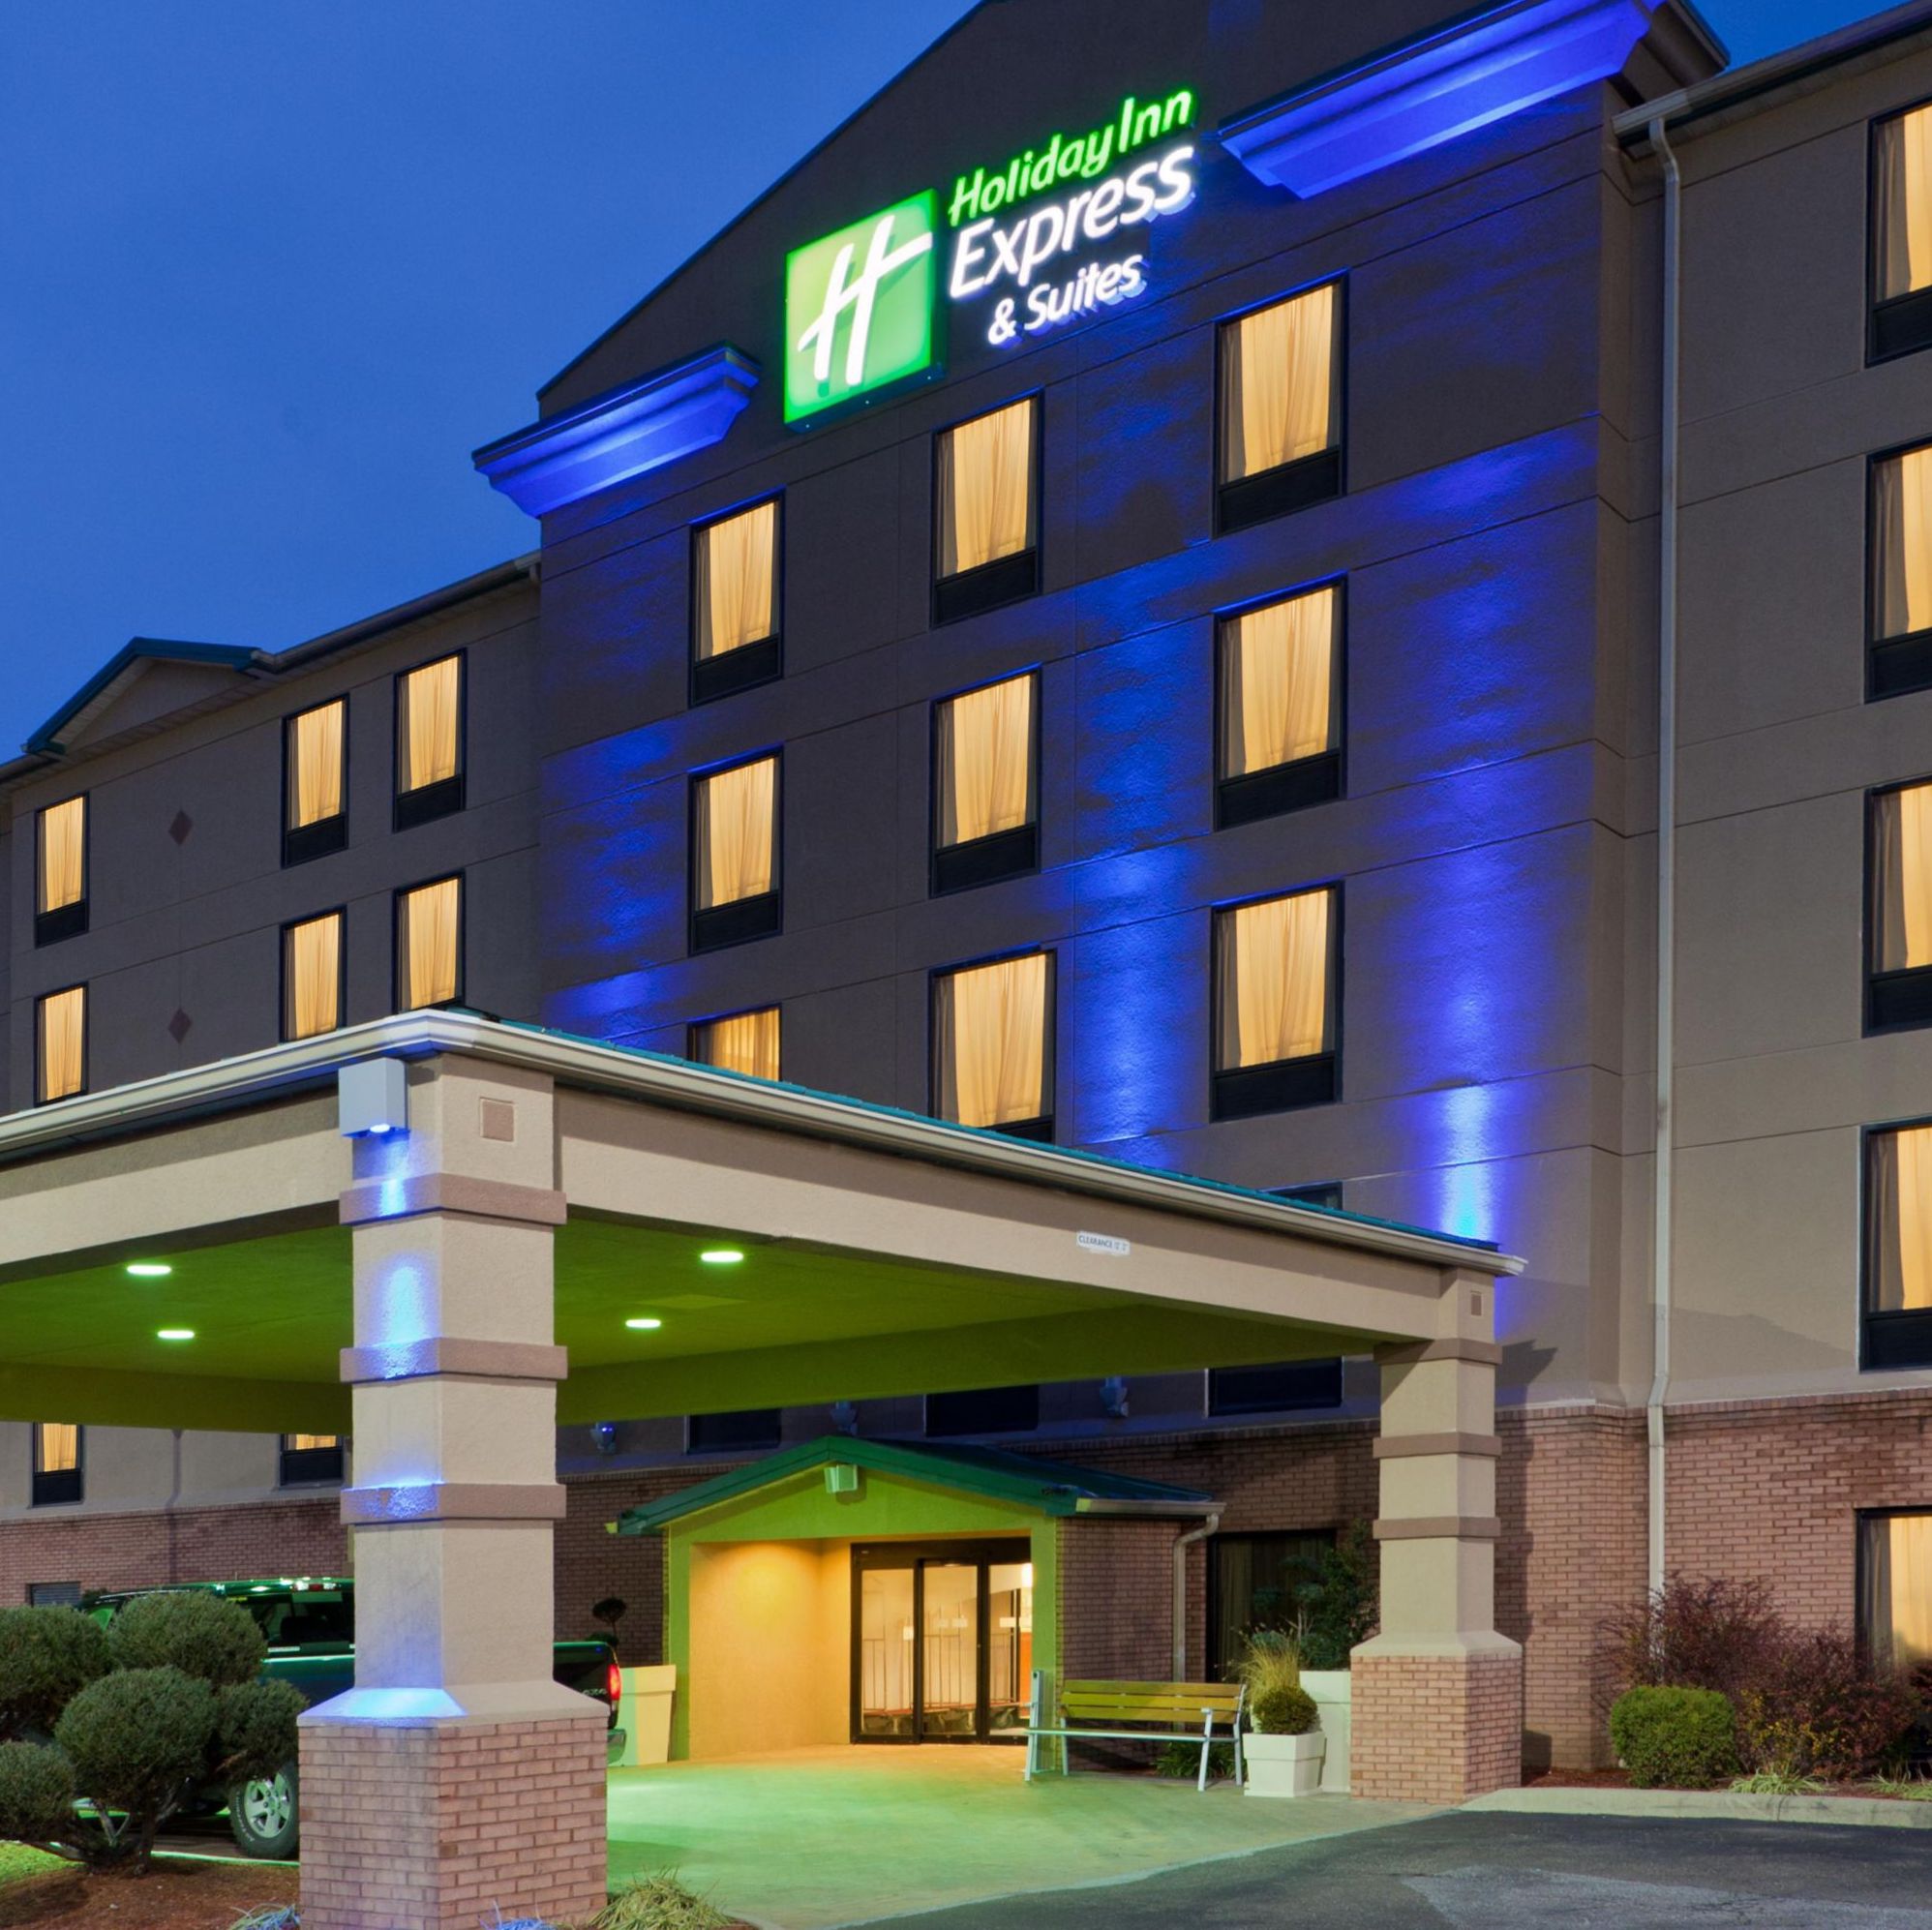 holiday inn express and suites south charleston 3550842863 2x1 1